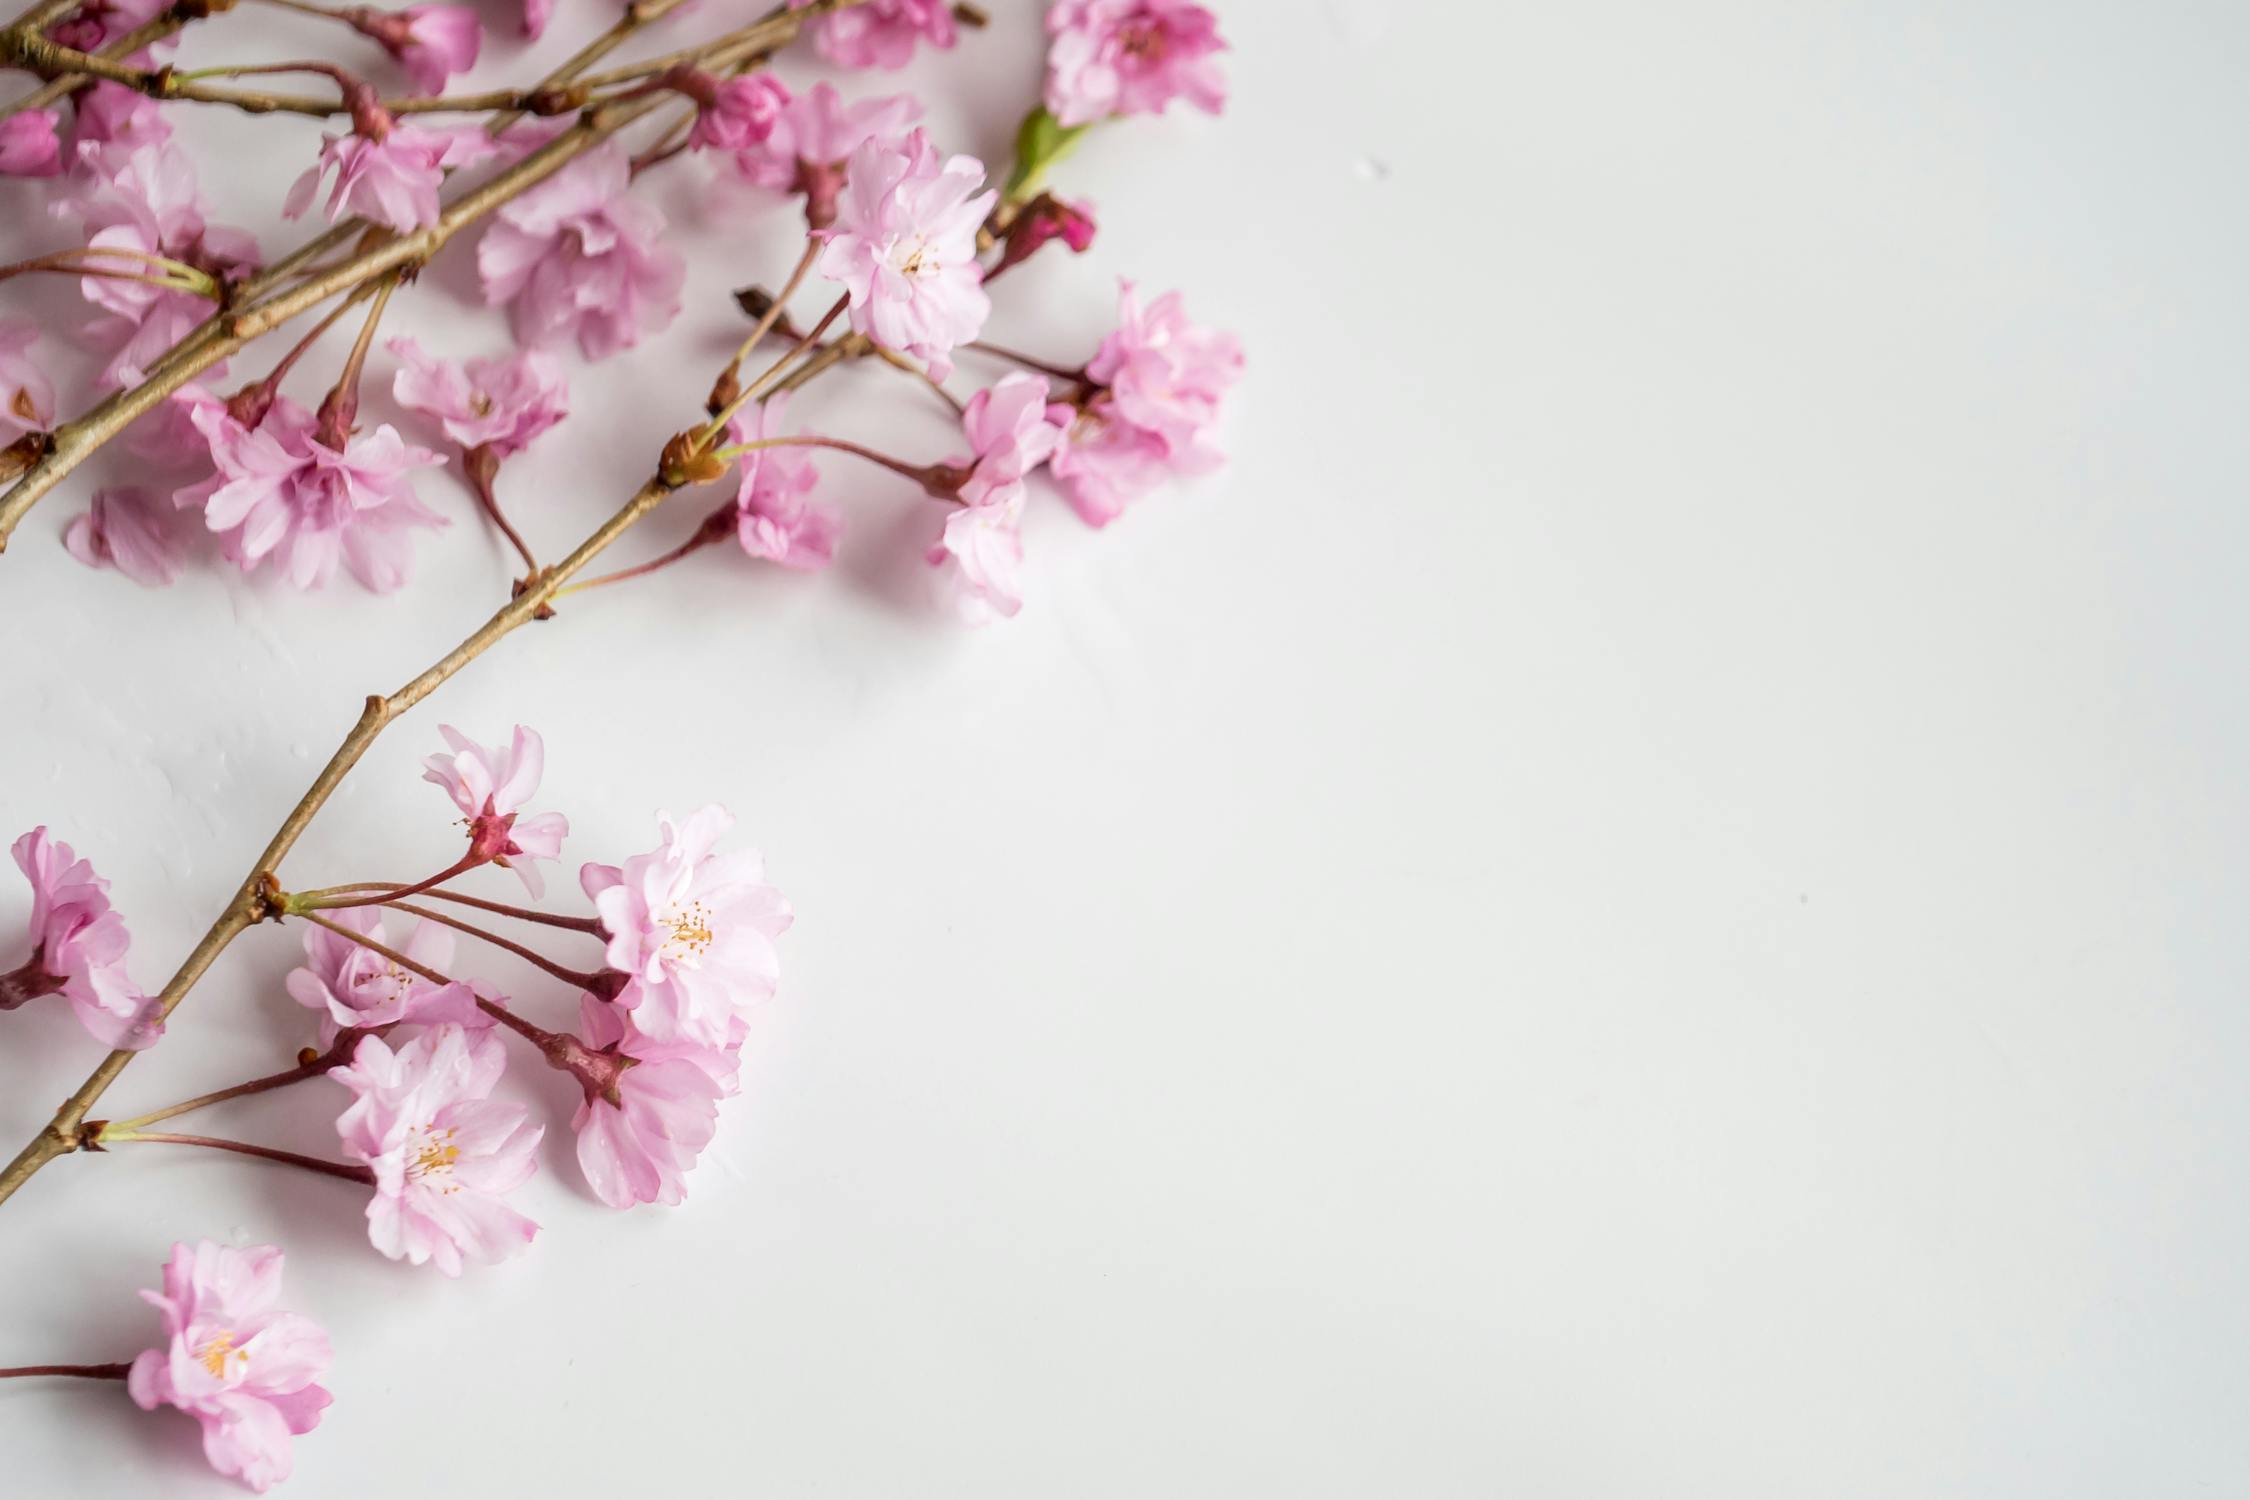 Bunch of tender pink cherry flowers on white background · Free Stock Photo